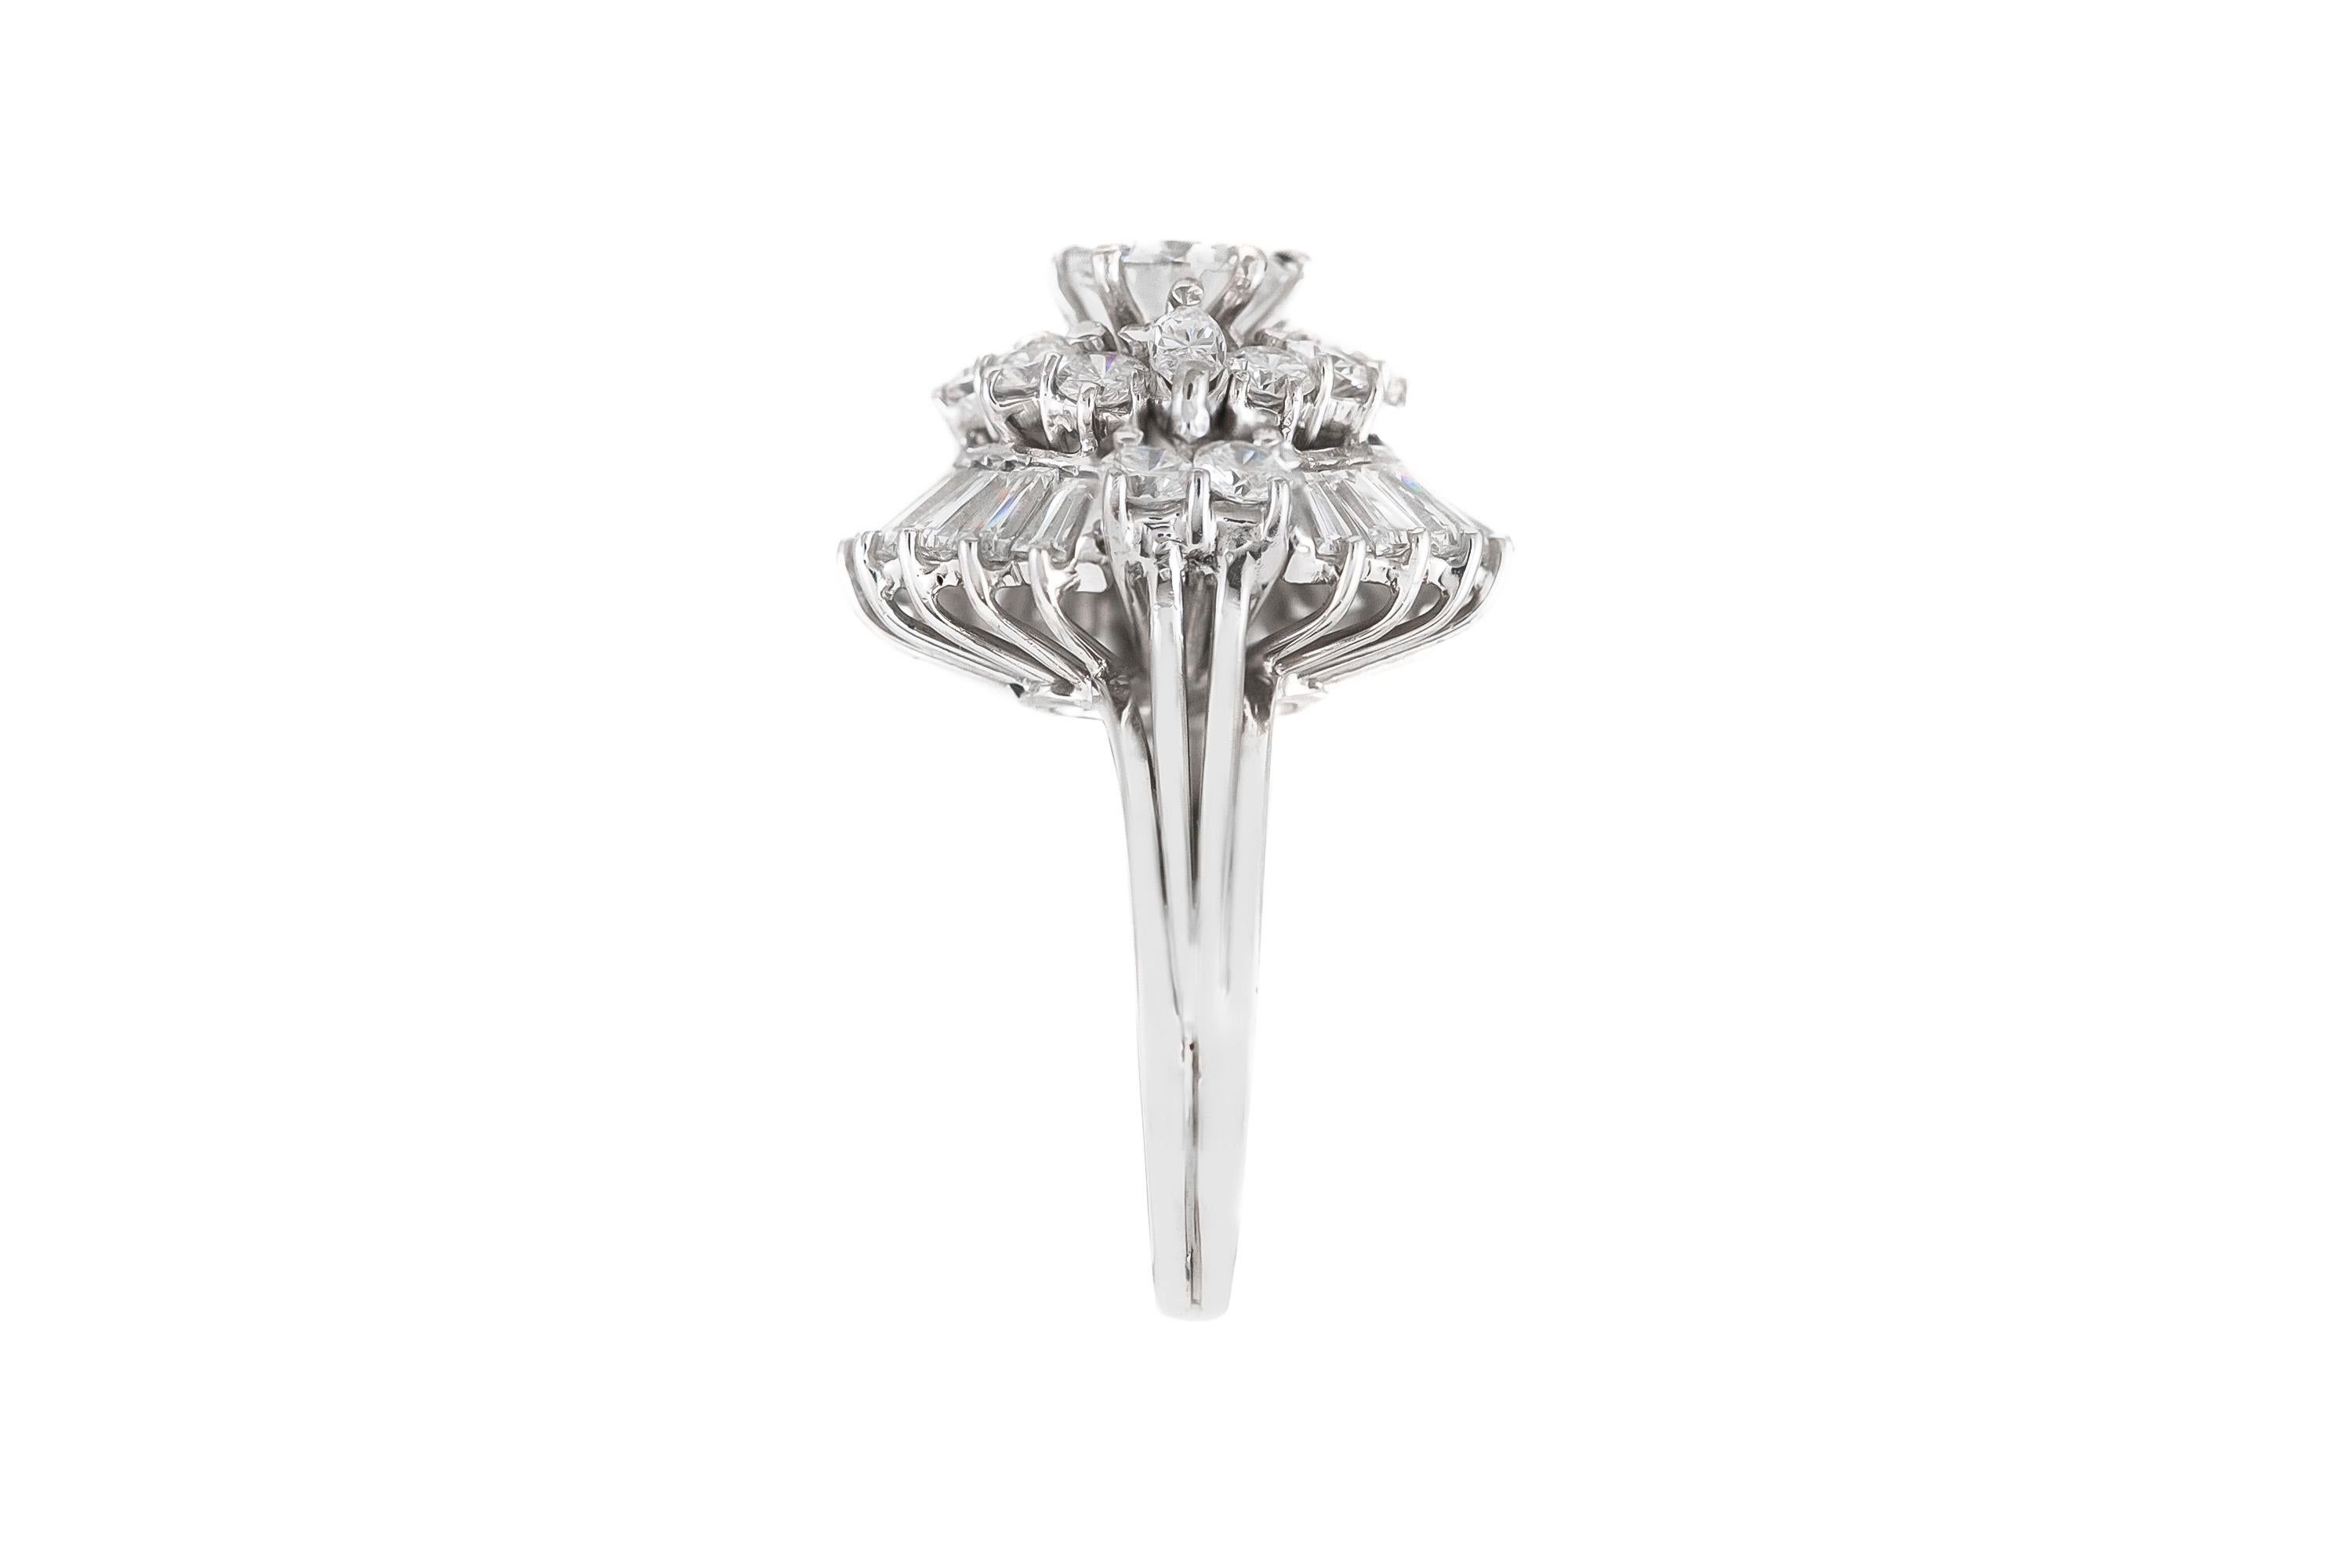 The ring is finely crafted in 14k white gold with diamond weighing approximately total of 4.50 carat.
Size 6.00 ( easy to resize )
Circa 1950.
